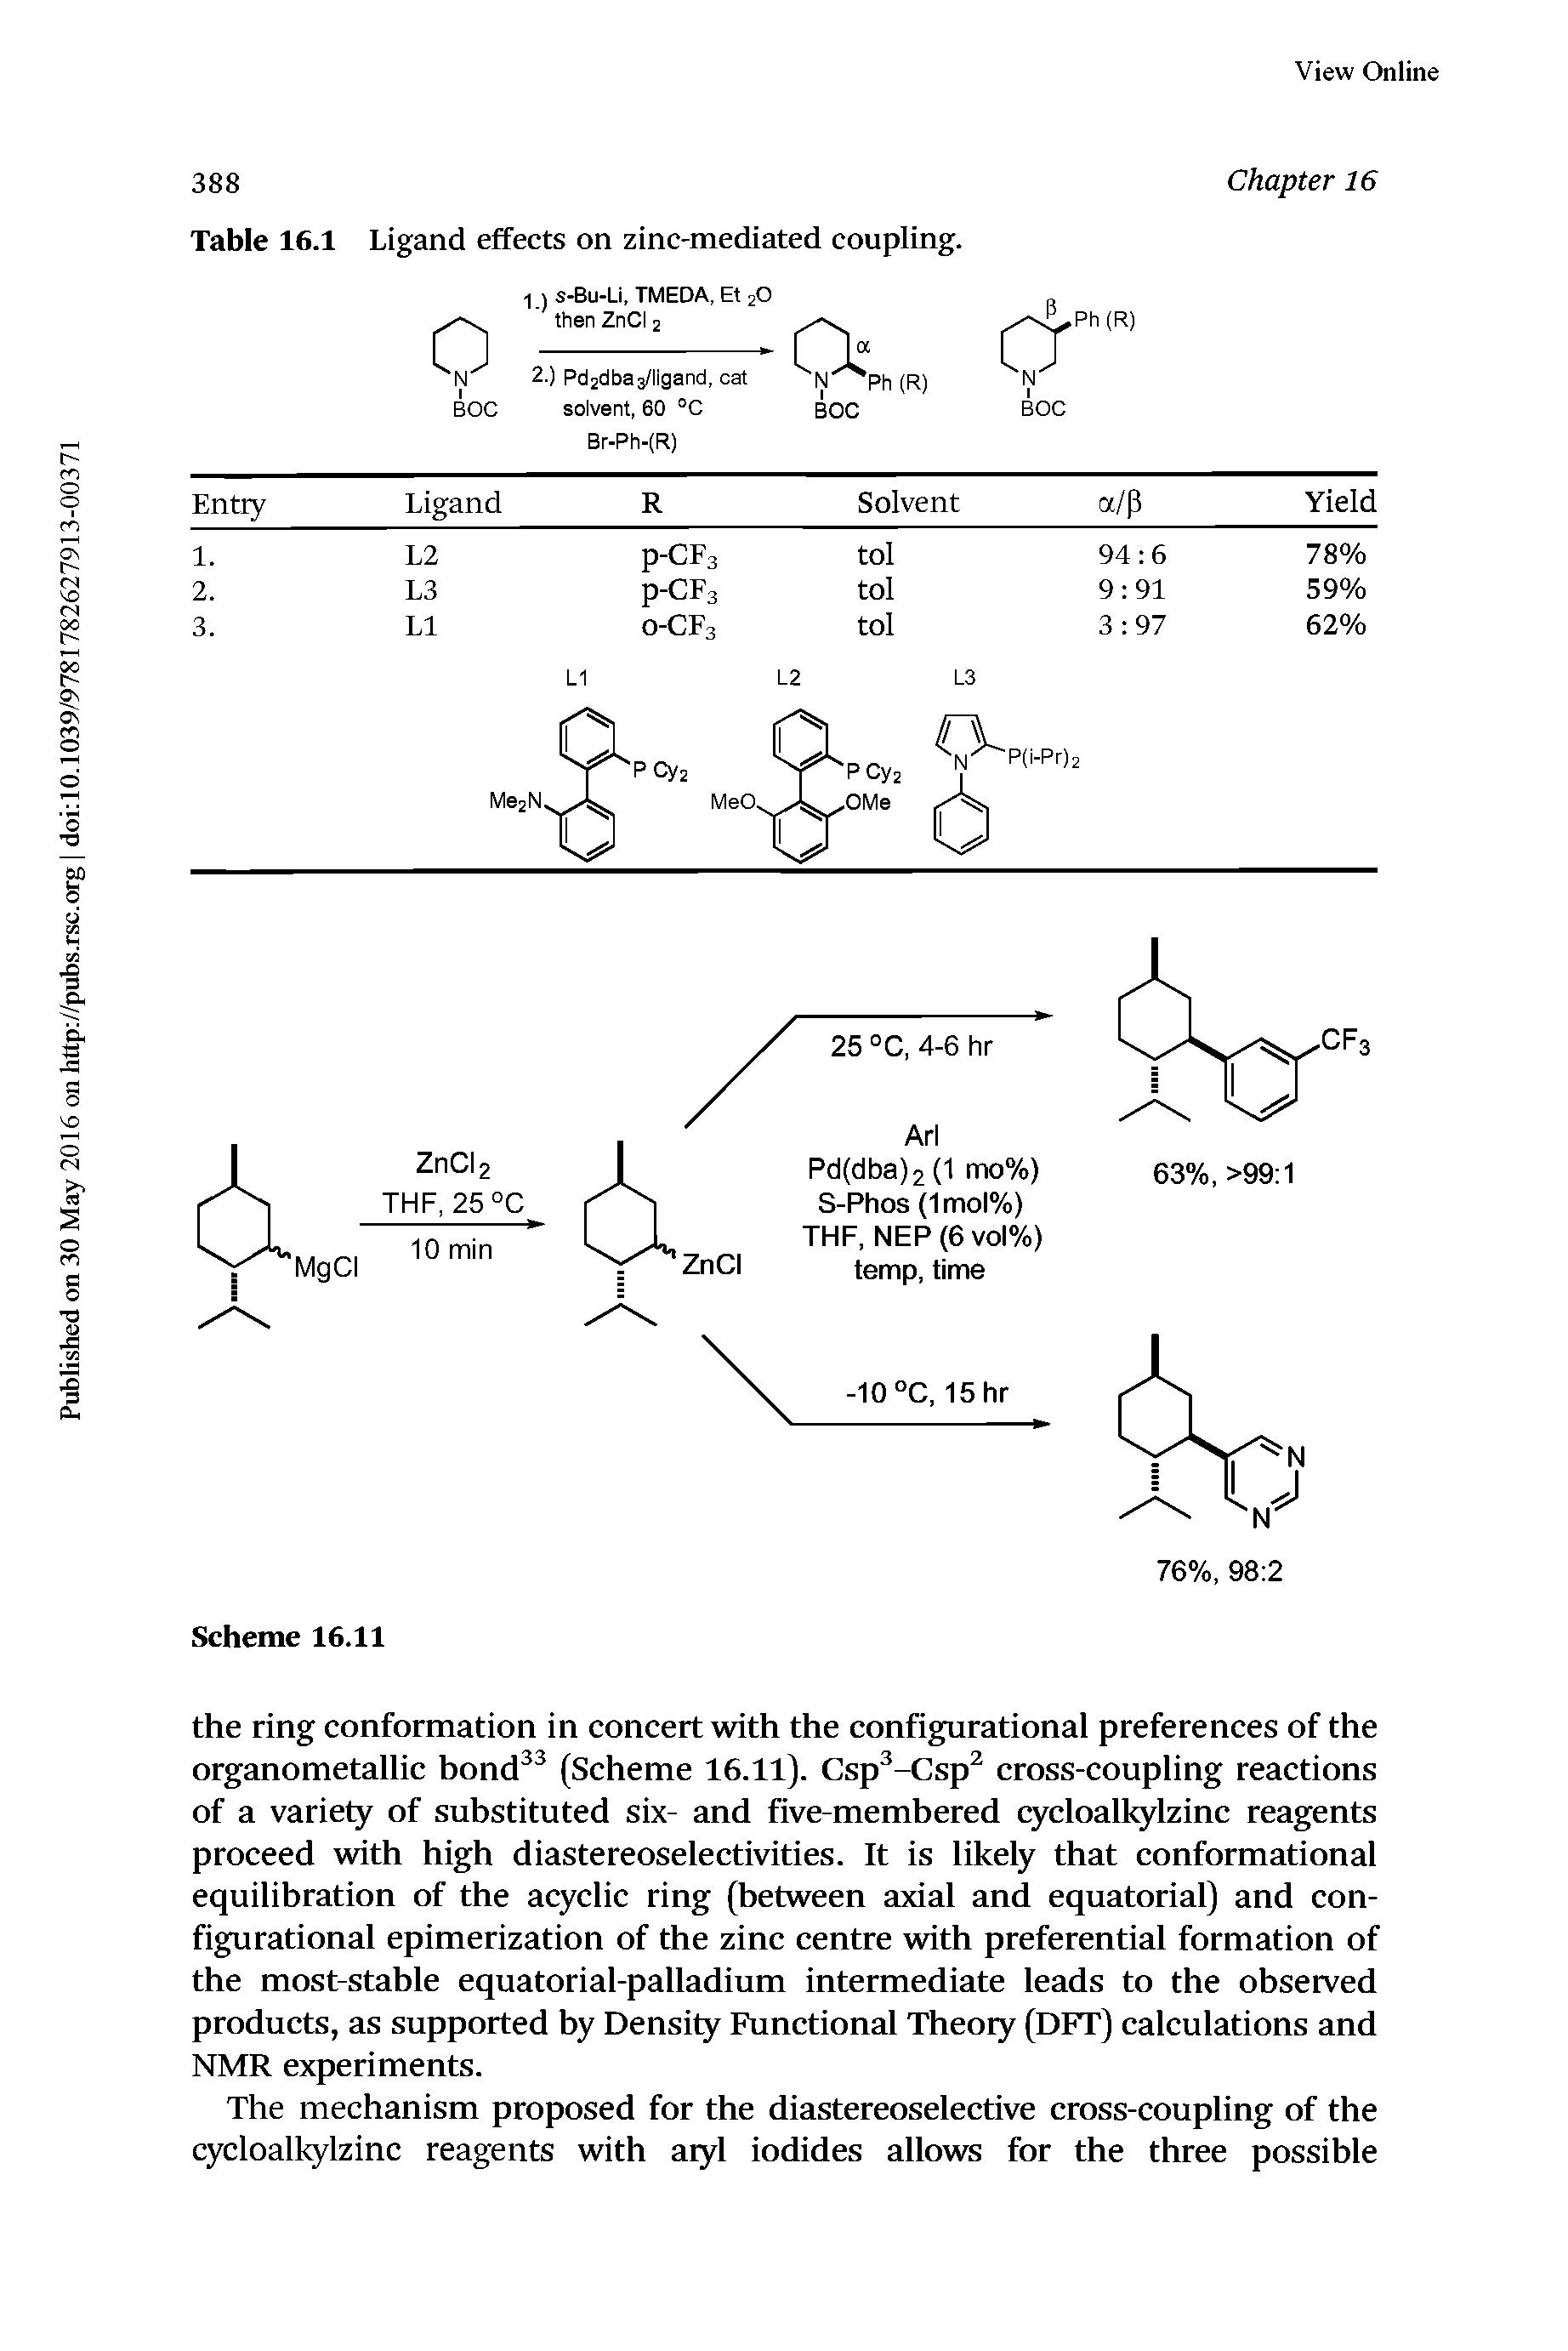 Table 16.1 Ligand effects on zinc-mediated coupling.